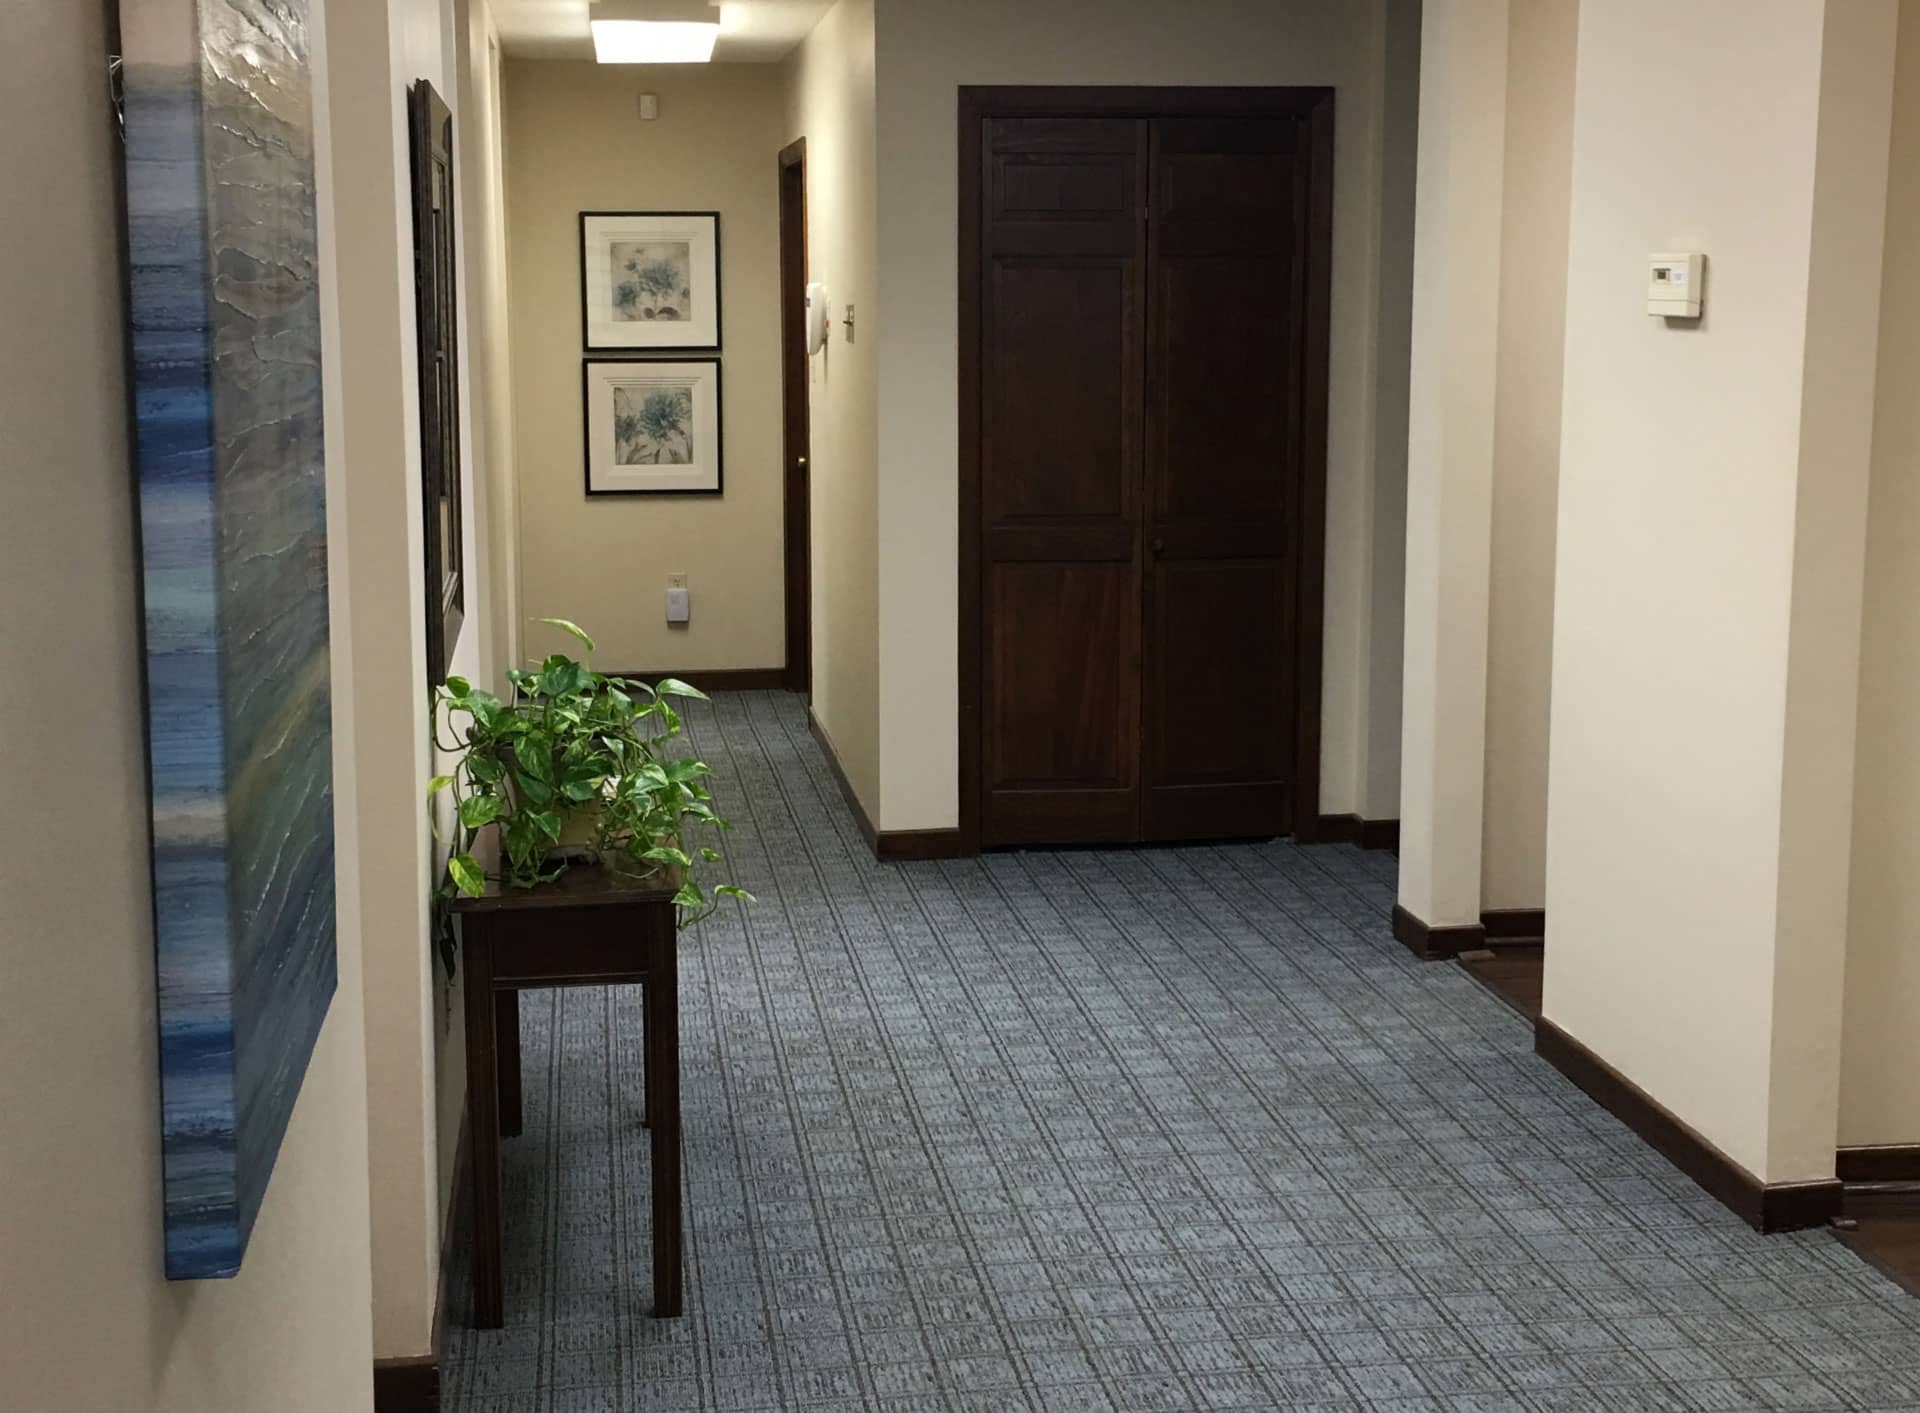 office hallway with brown door at end and blue patterned carpet